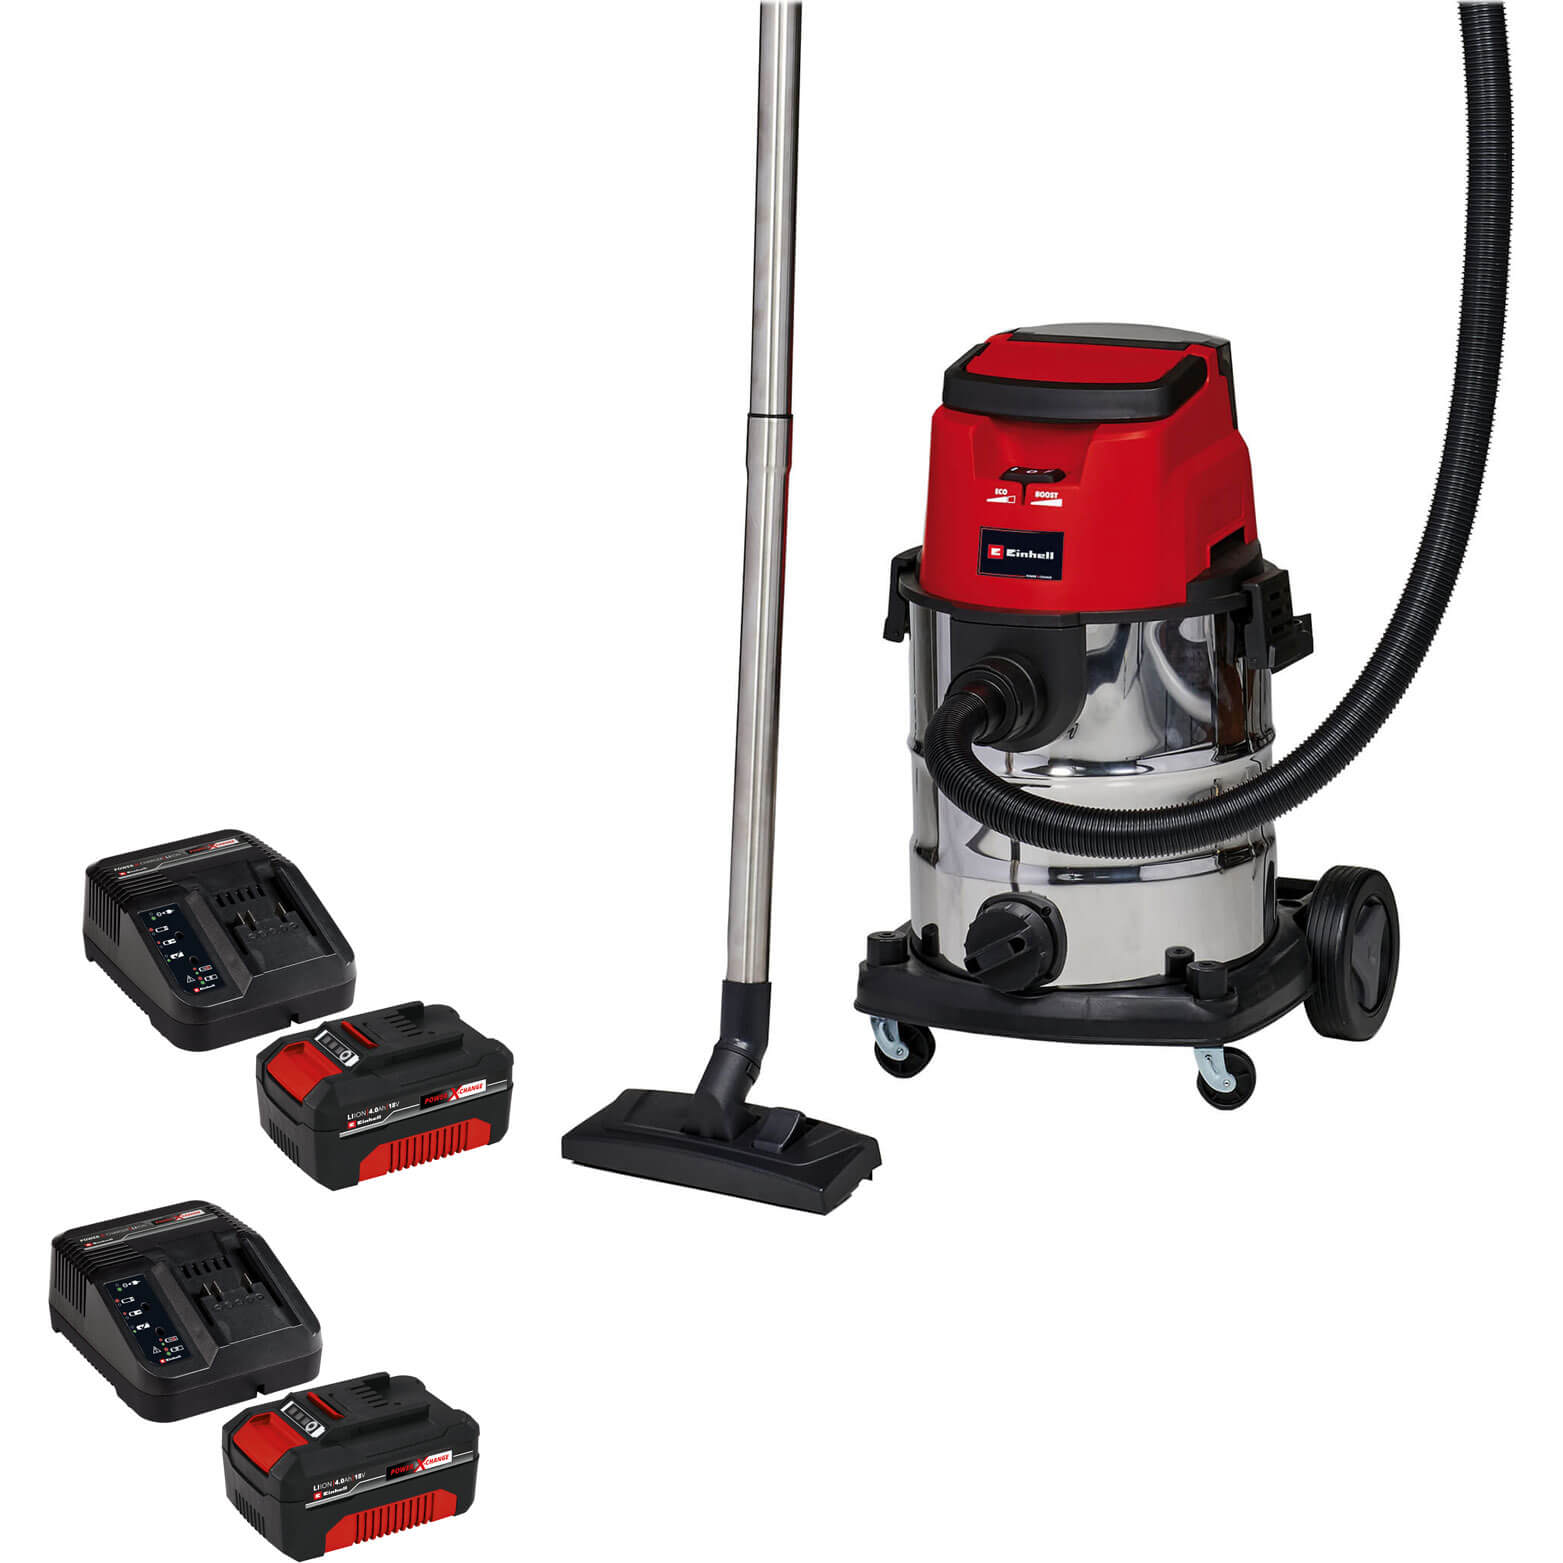 Einhell TE-VC 36/25 Li S 36v Cordless Stainless Steel Wet and Dry Vacuum Cleaner 25L 2 x 4ah Li-ion Charger